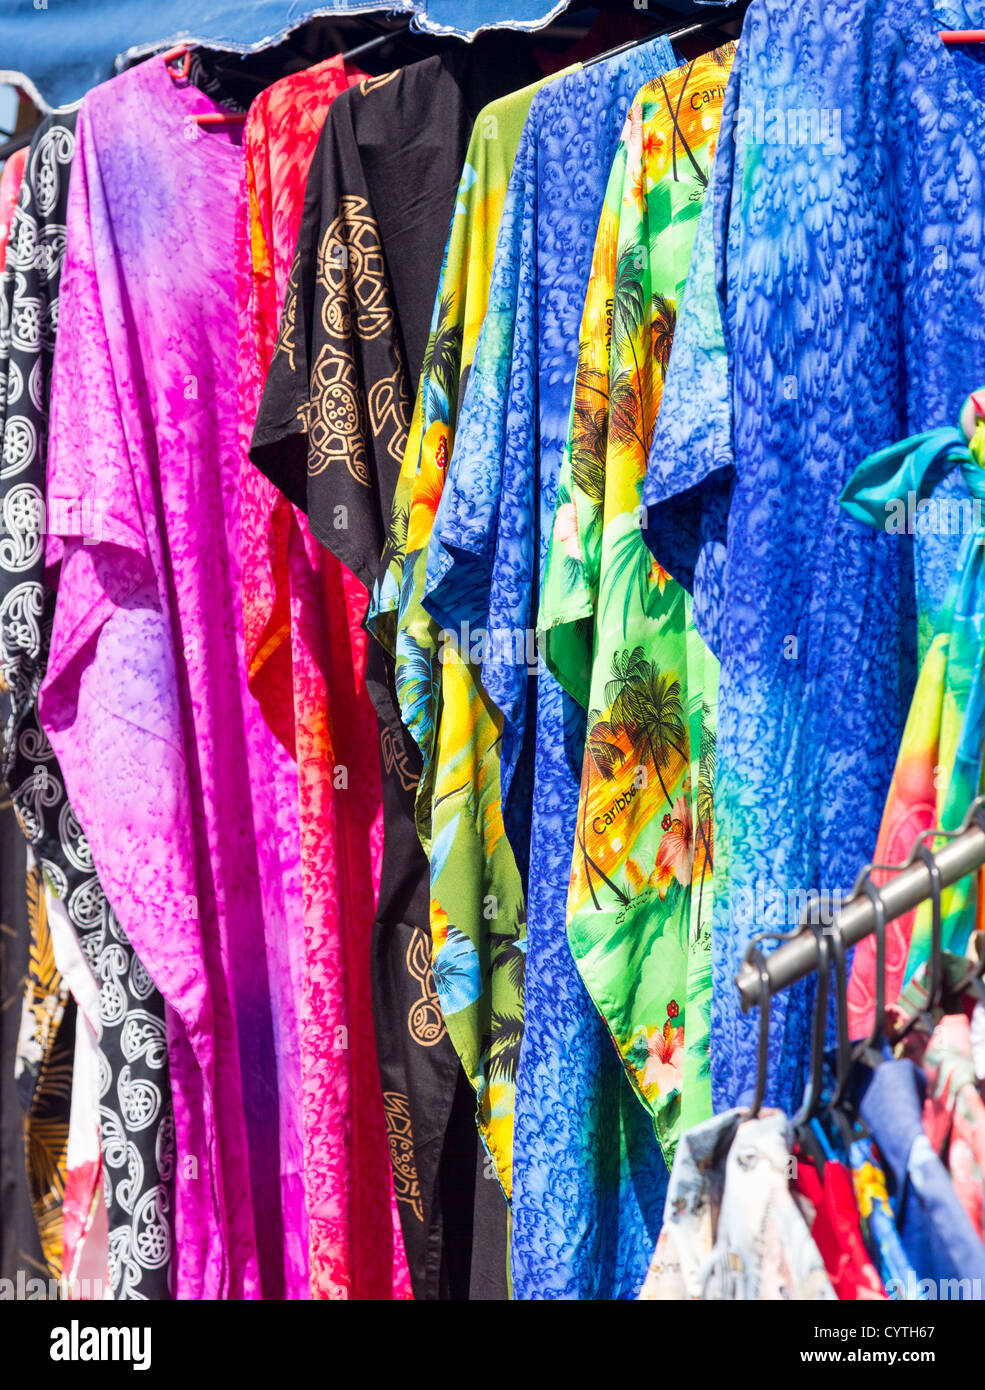 Close up of details of colorful clothing on street market stall Stock Photo